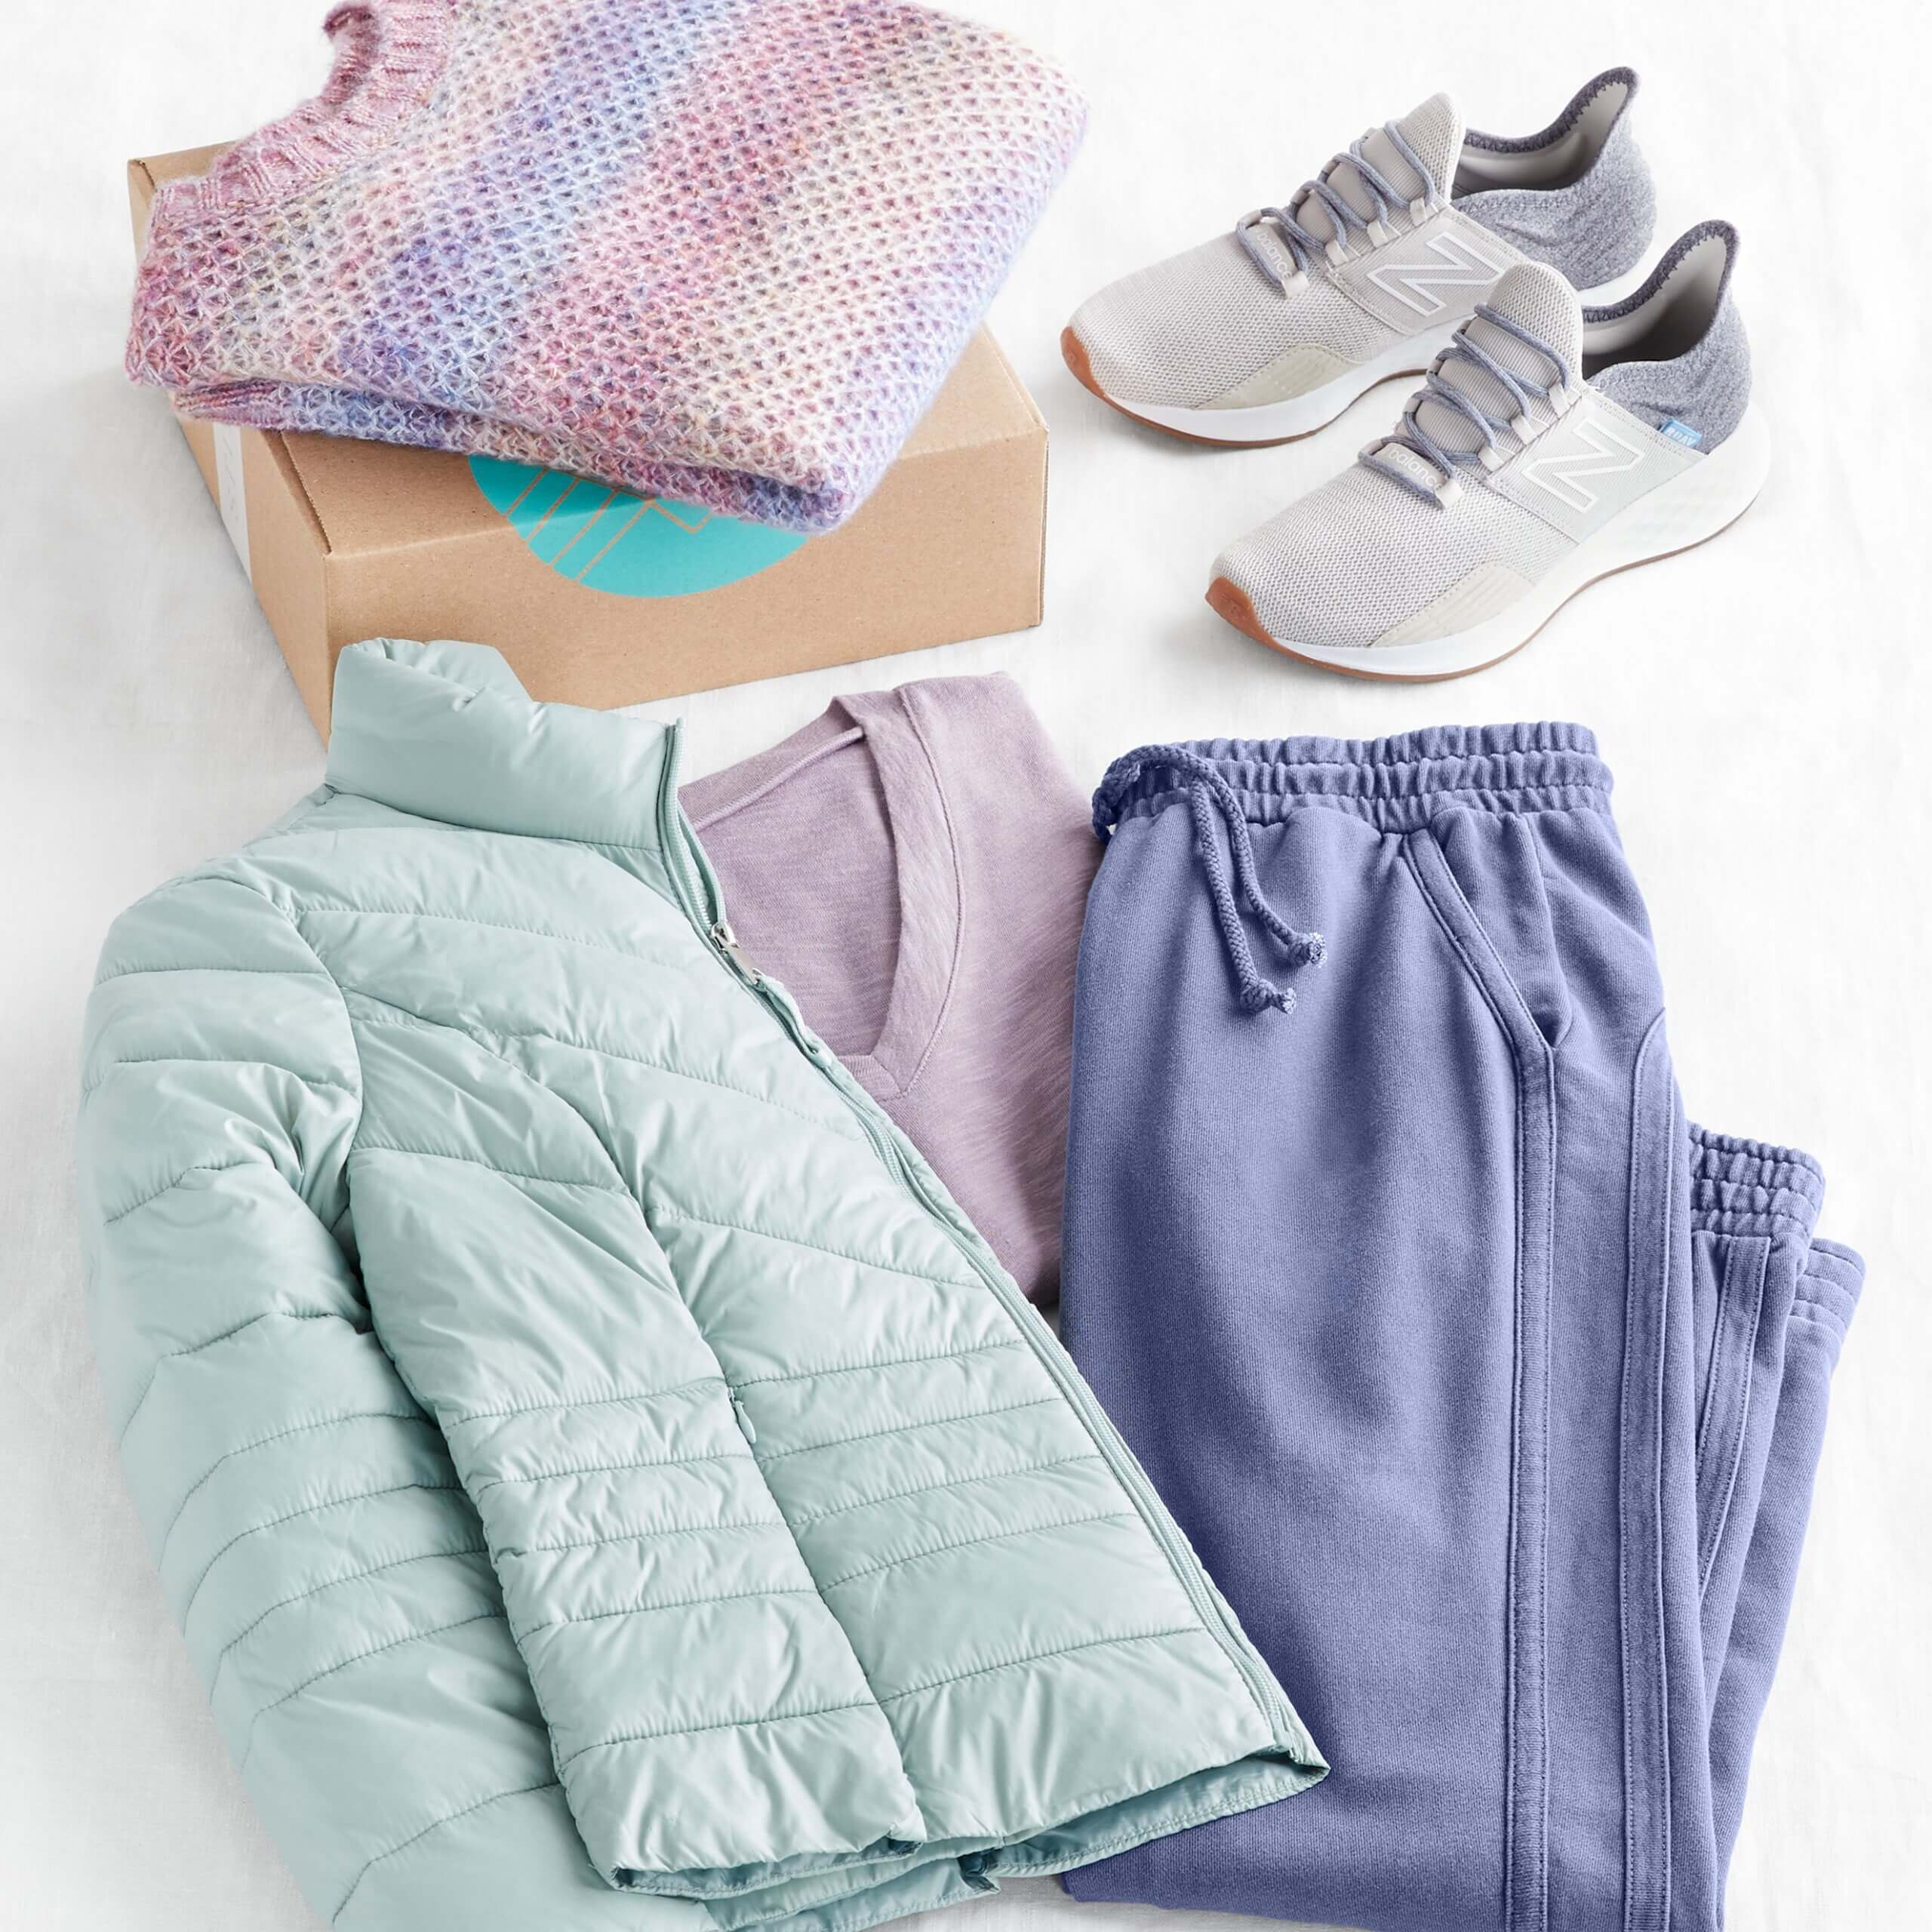 Stitch Fix Women's outfit laydown featuring mint puffer jacket, purple tee, blue jogger pants and grey sneakers, next to purple pullover on a Stitch Fix delivery box. 